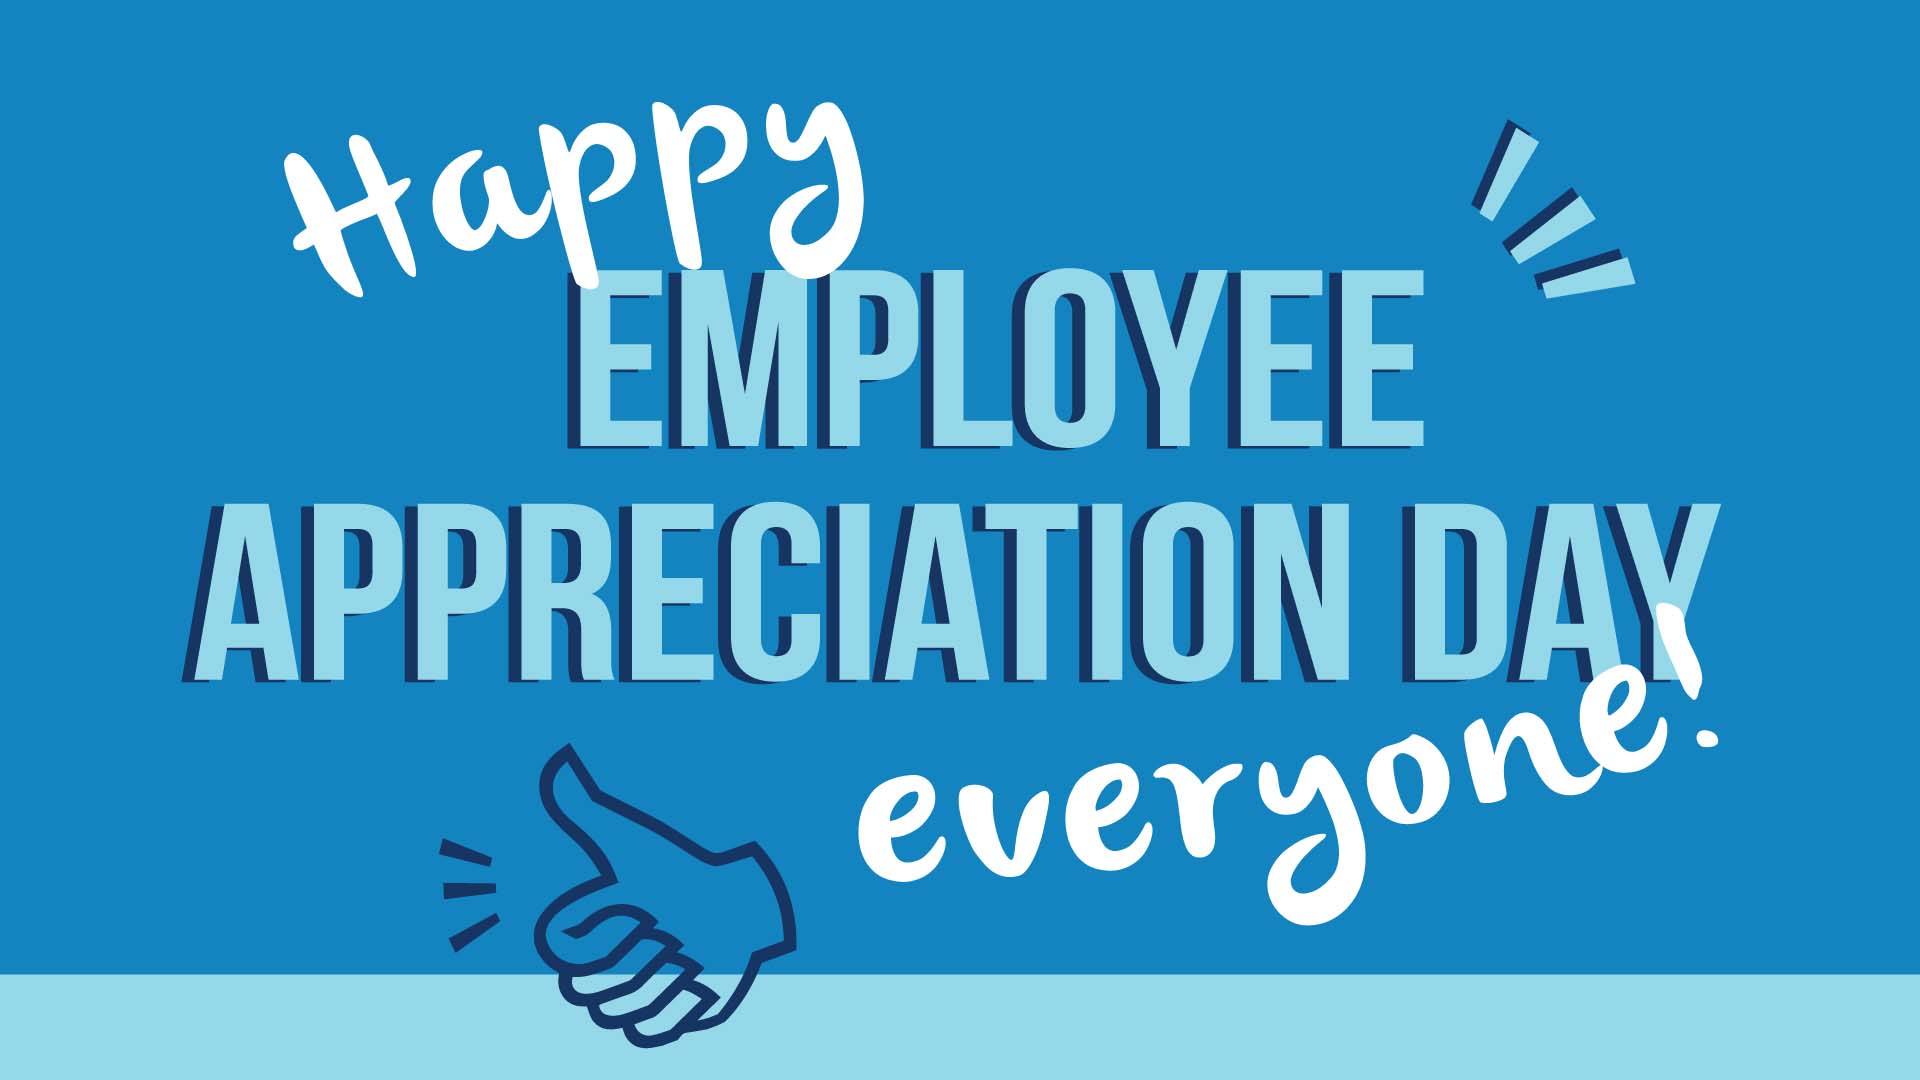 Blue background with "Happy Employee Appreciation Day everyone!' spelled out across the graphic